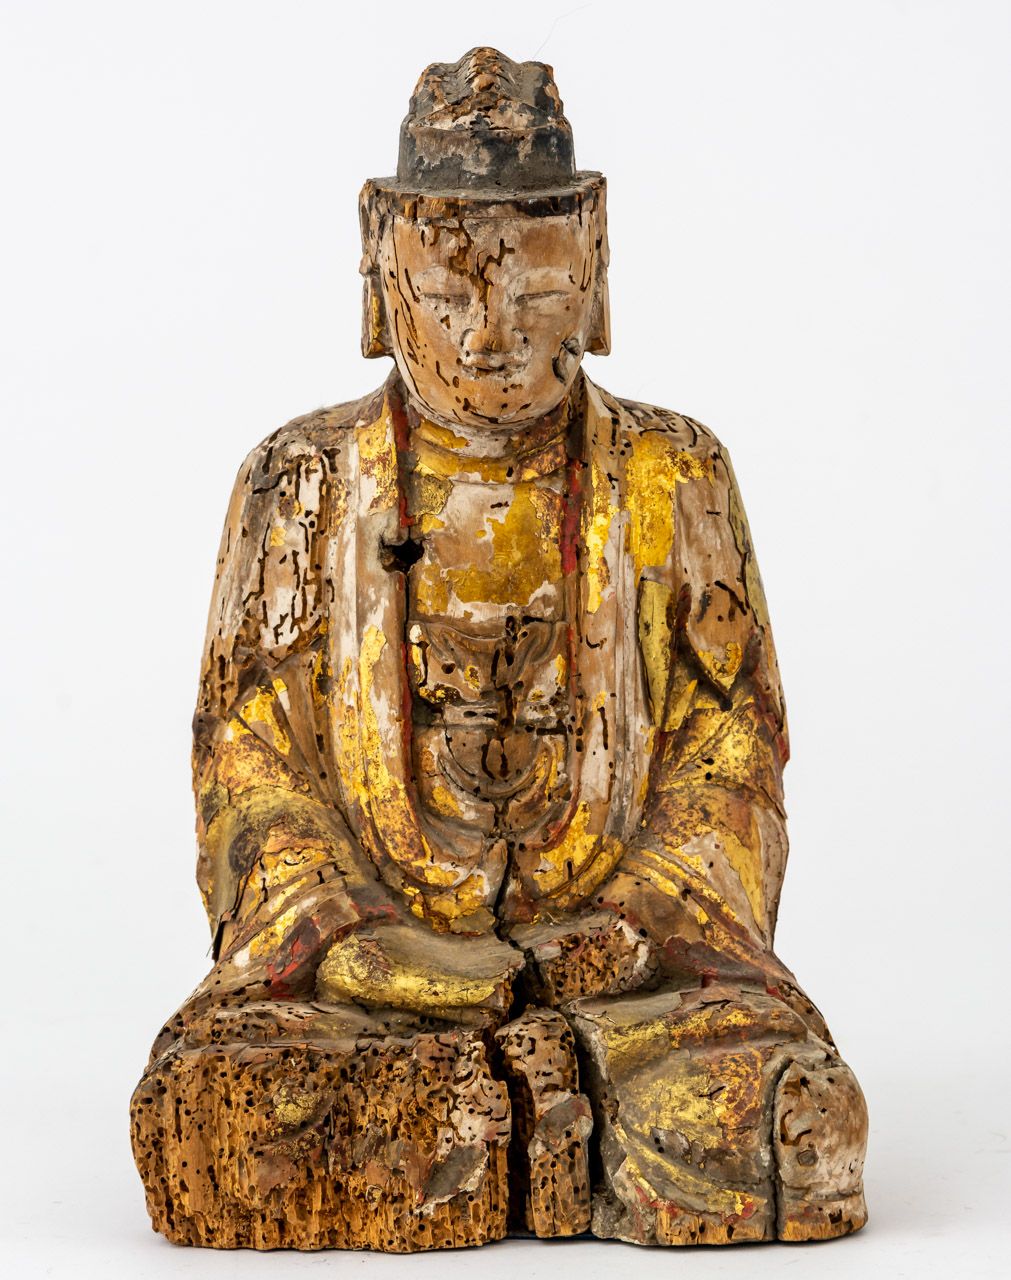 BUDDHA BUDDHA_x000D_


wood, remains of paint, wormy, 19th c. Or older_x000D_


&hellip;